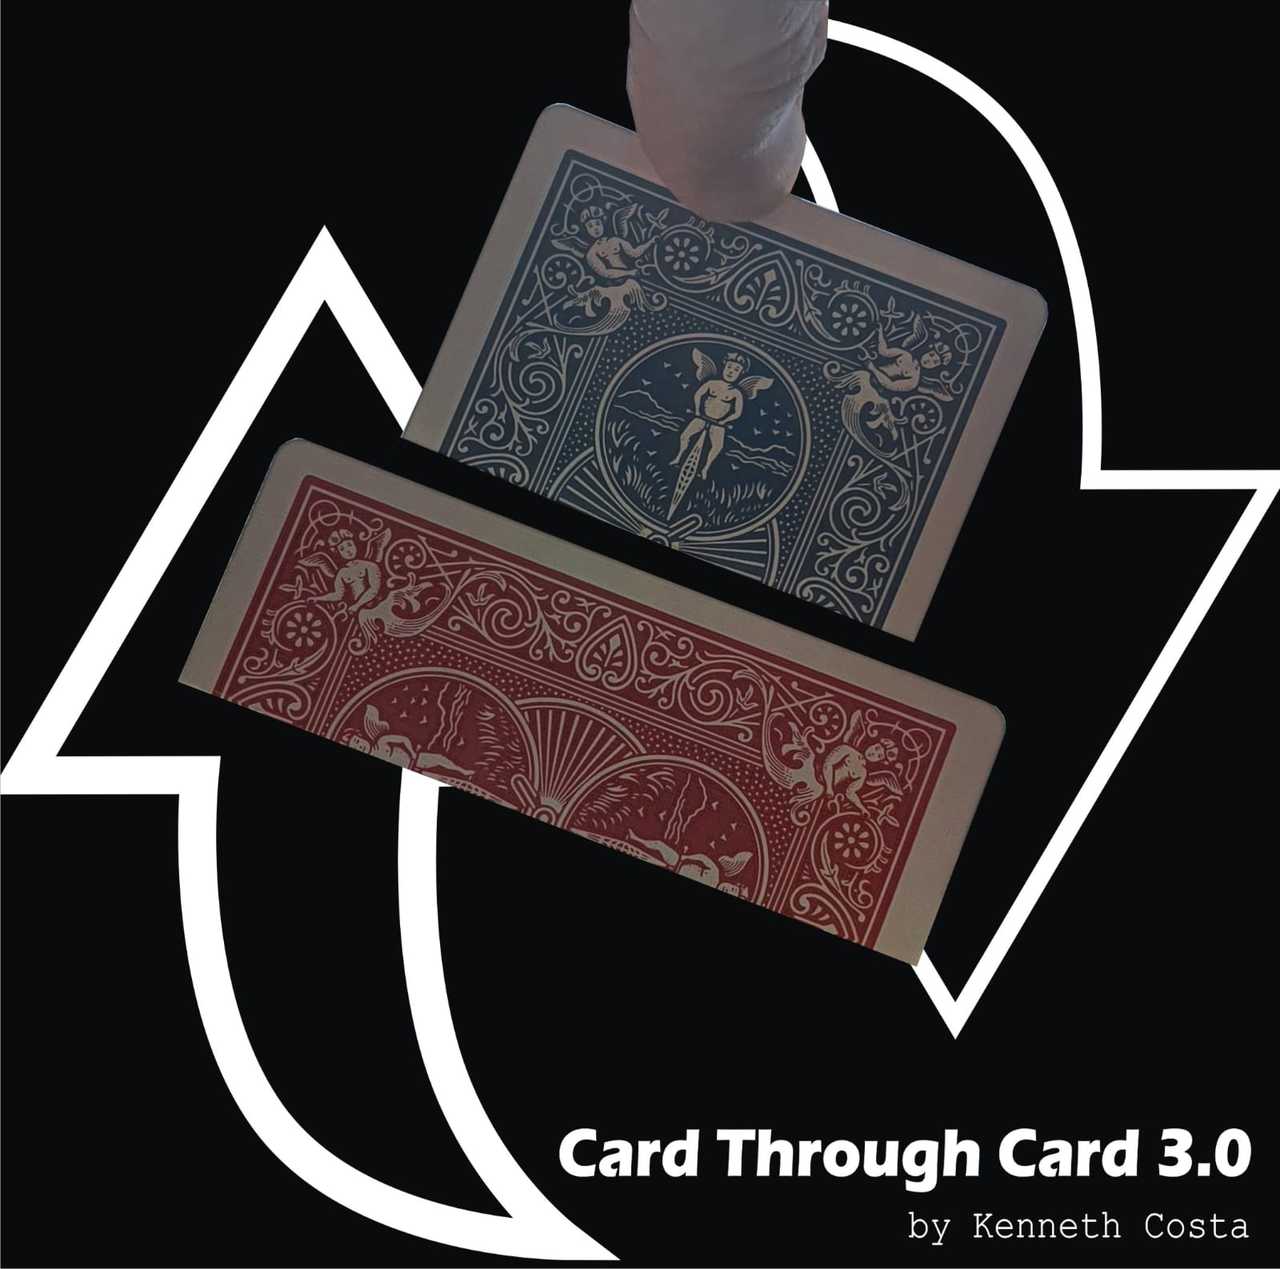 C.T.C. 3.0 (Card Through Card) by Kenneth Costa (Mp4 Video Magic Download)